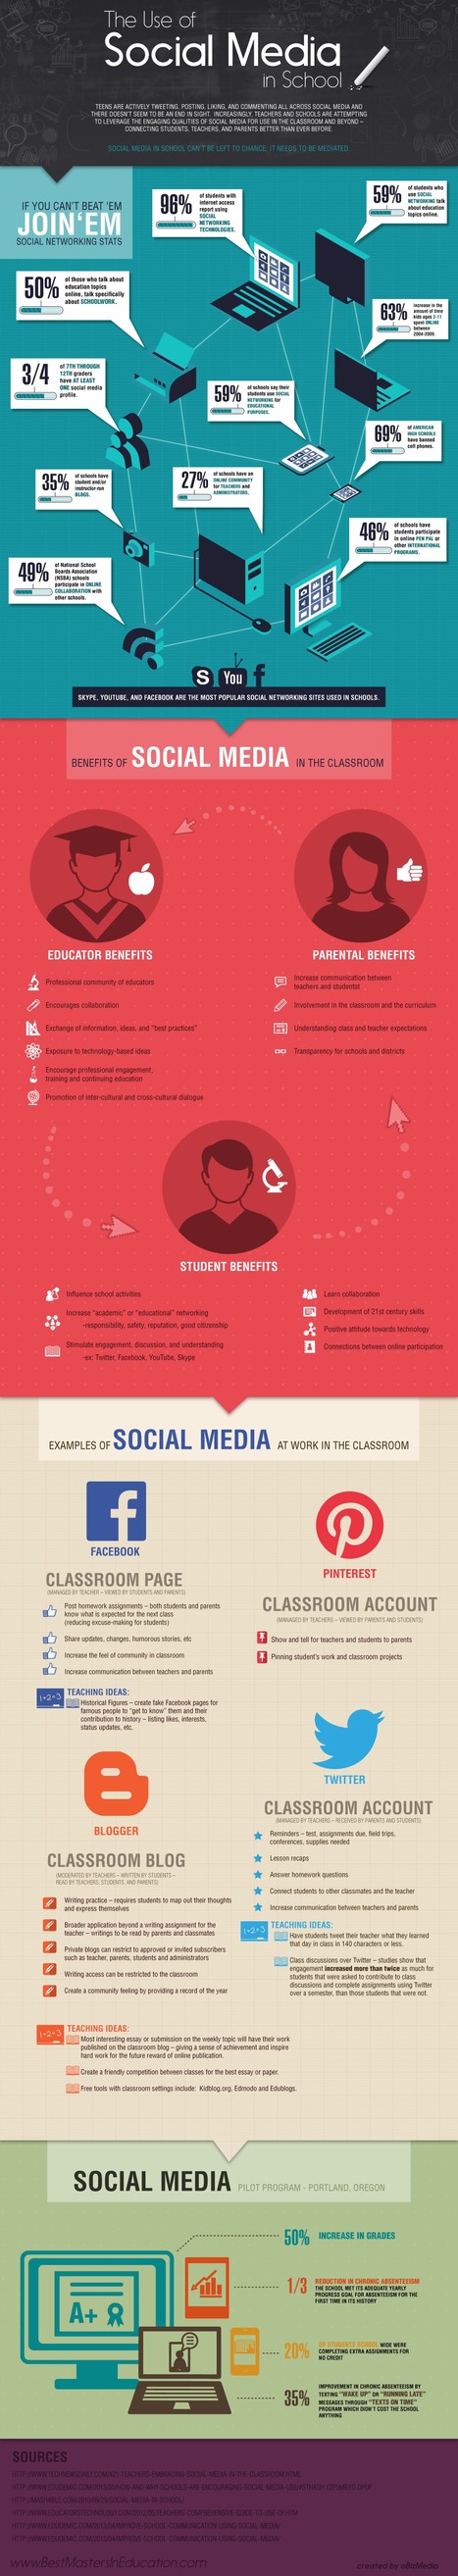 Social Media 101: Is There a Place For Social Media in Classrooms? [Infographic] | A New Society, a new education! | Scoop.it